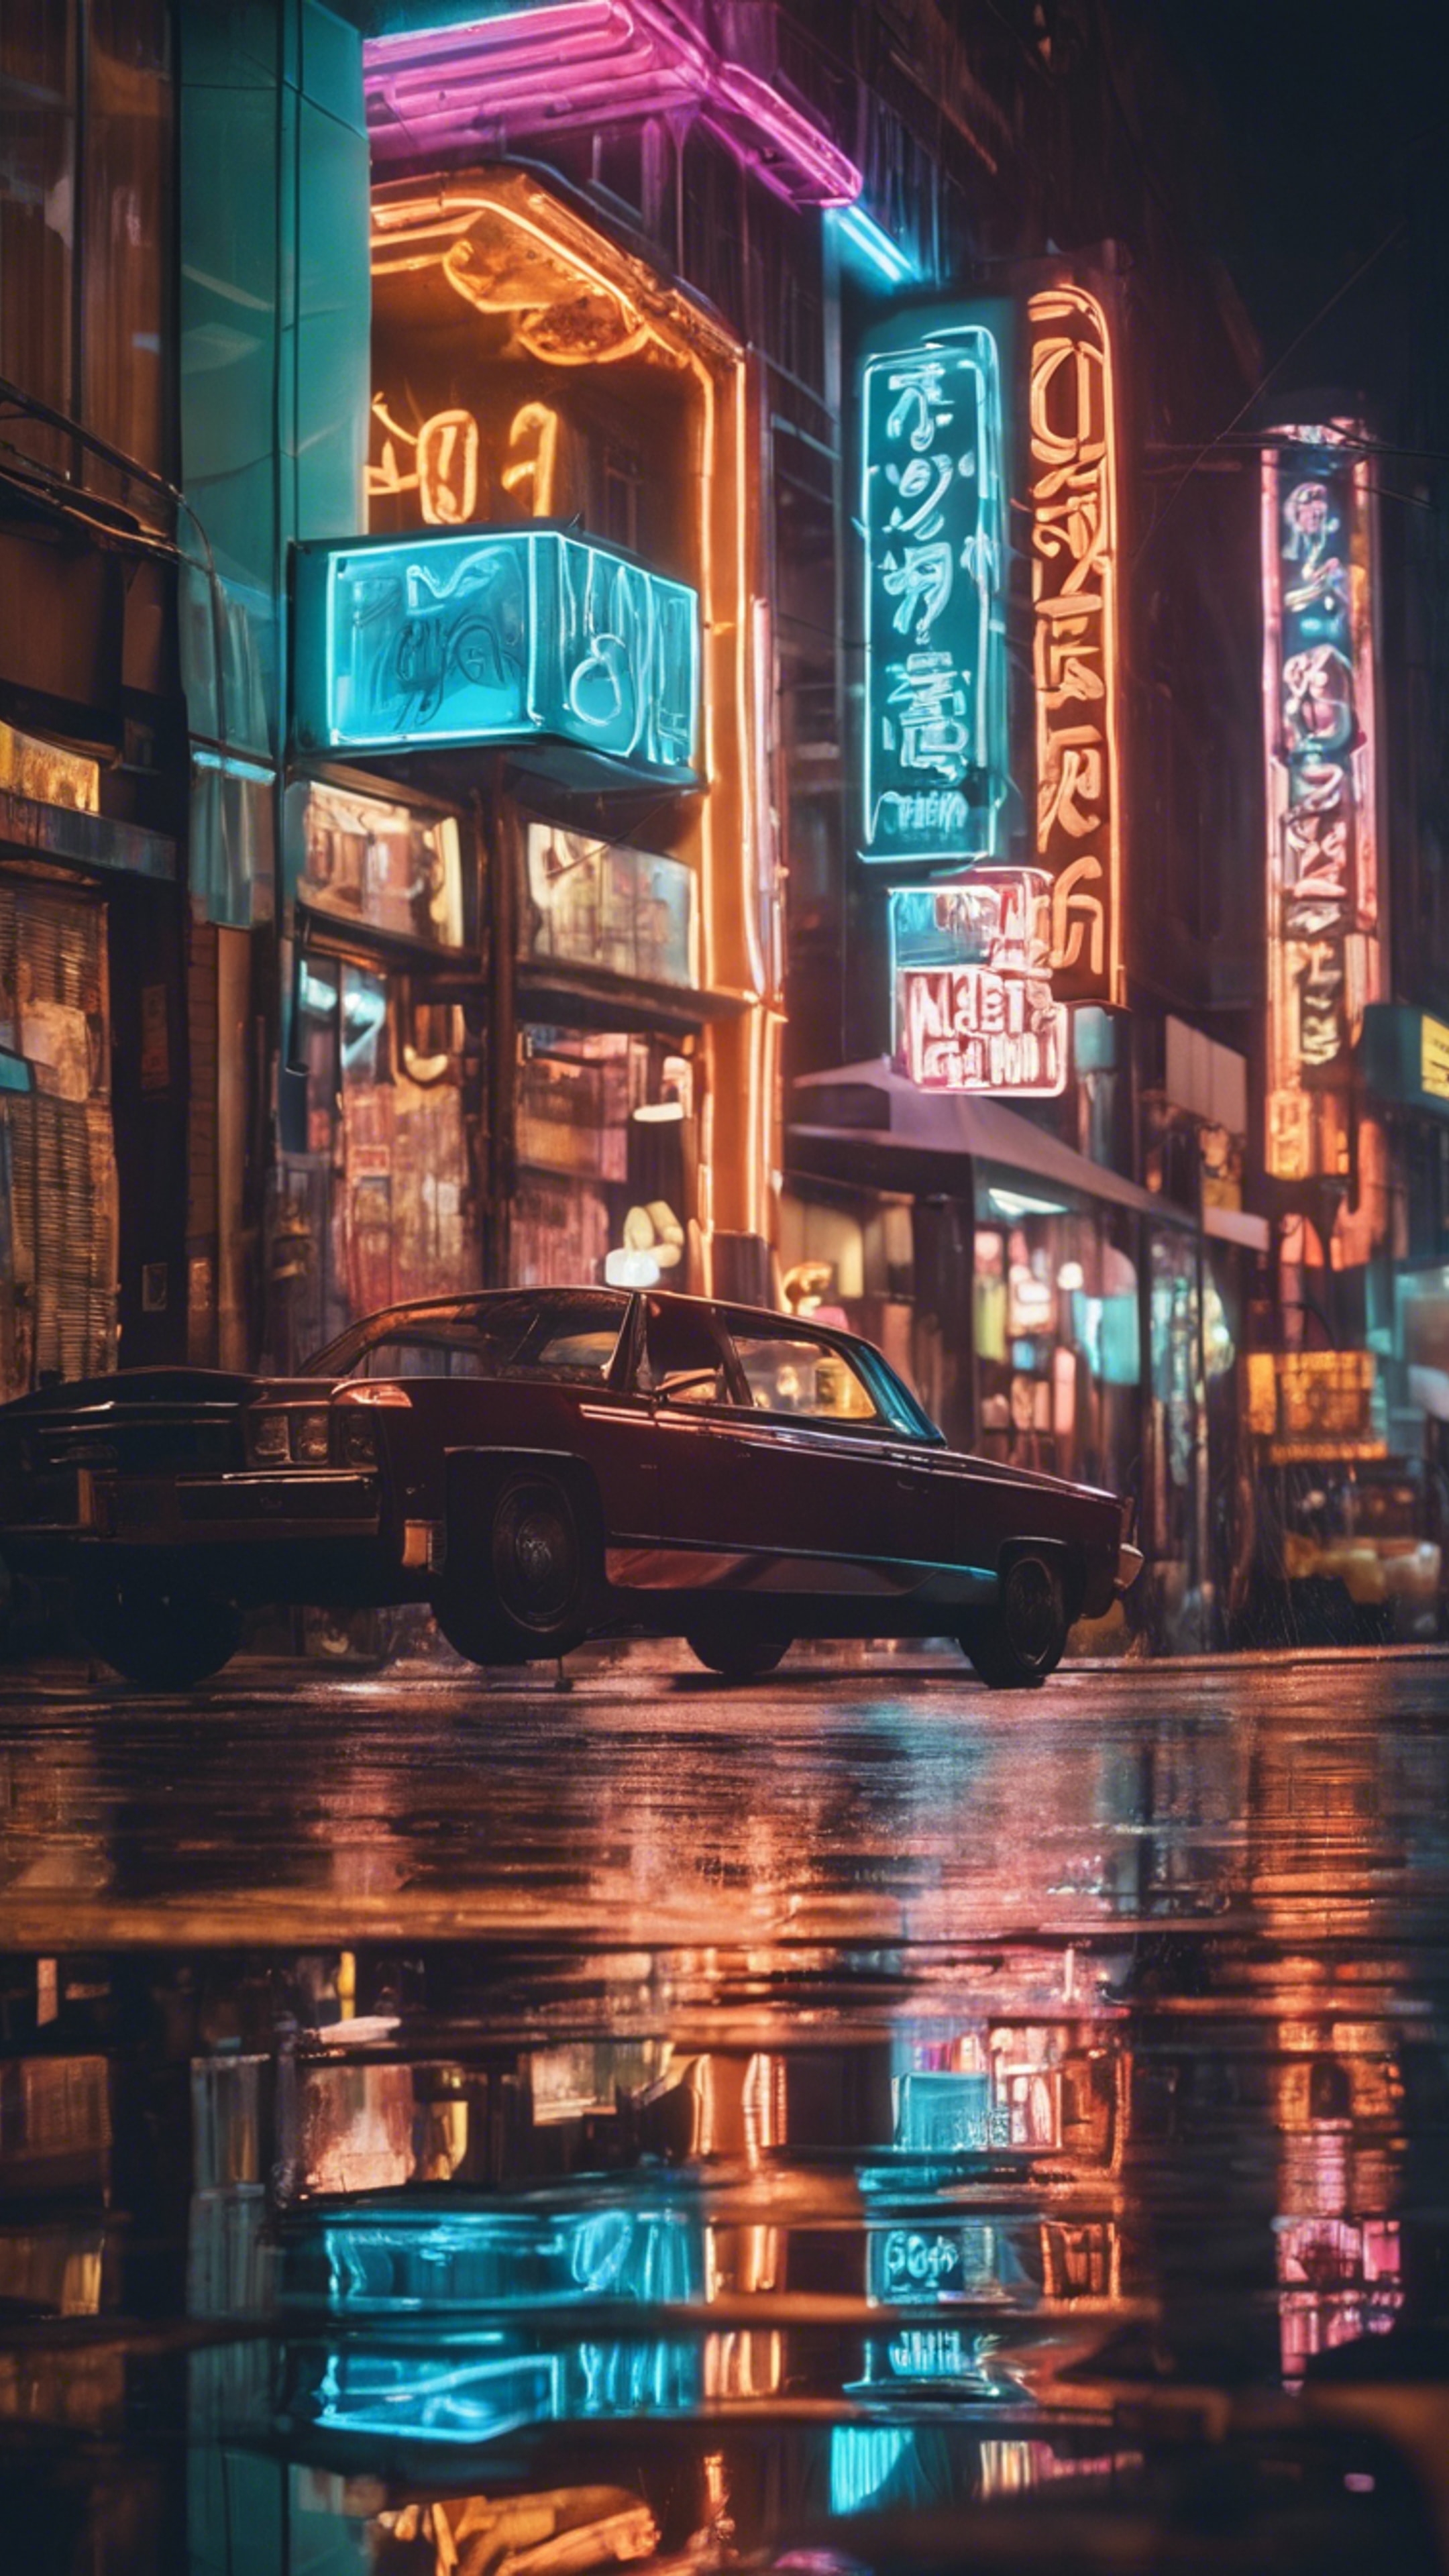 A dream vision of neon signs reflected on wet city streets at night. Tapetai[79232e509baa4ed0a24c]